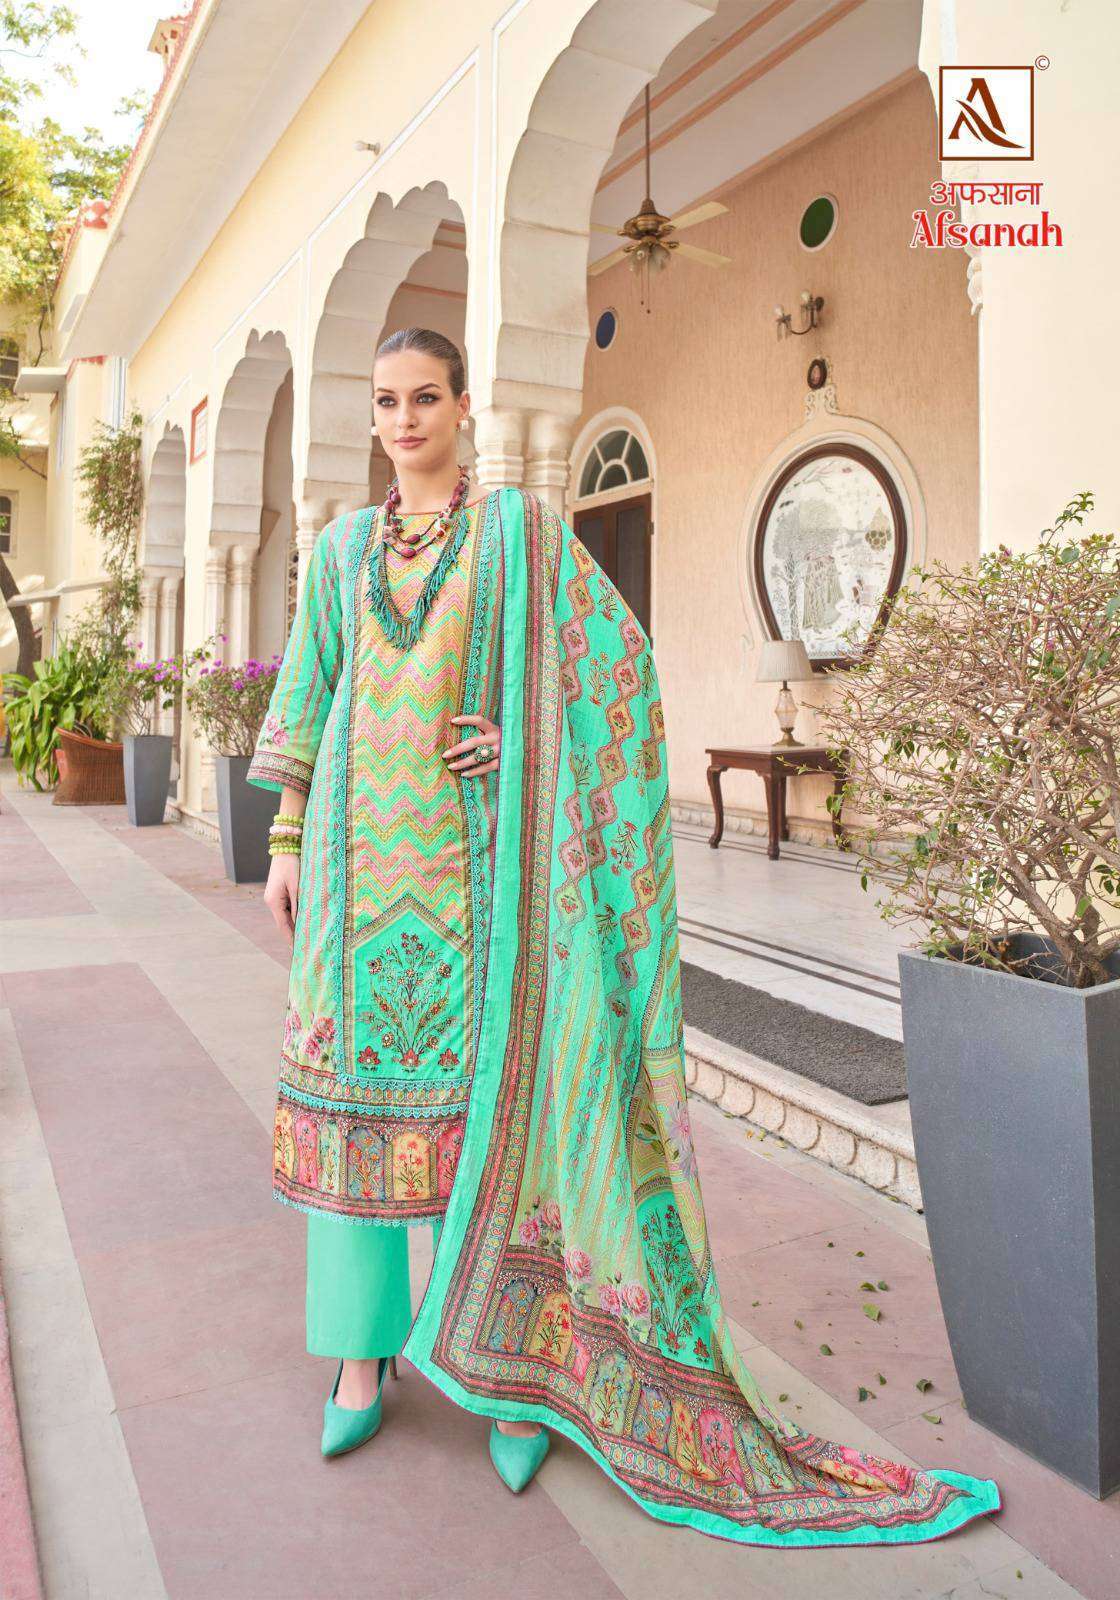 Alok Suit Afsanah Lawn Cotton With Embroidery Work Pakistani Dress Material At Wholesale Rate